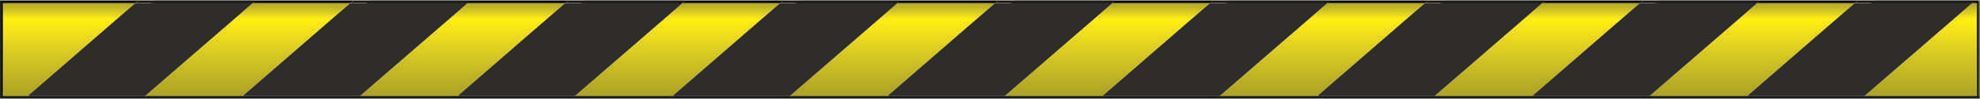 Barrier Tapes Non-adhesive - Yellow & Black